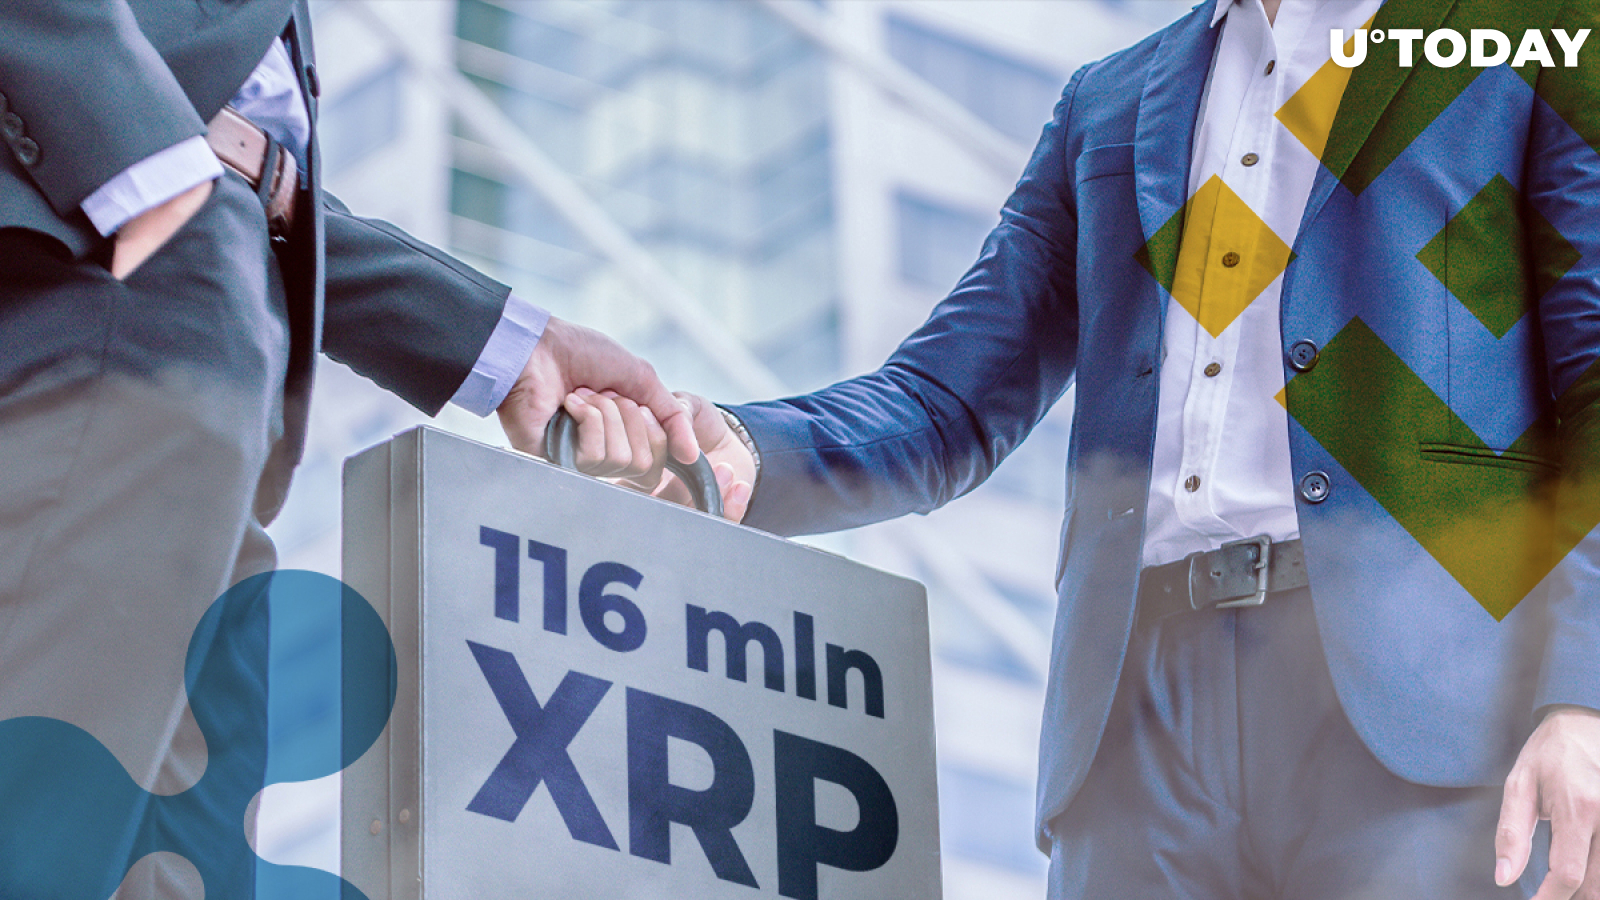 Ripple and Binance Giants Transfer Total of 116 Mln XRP, ODL Platform in Japan Involved